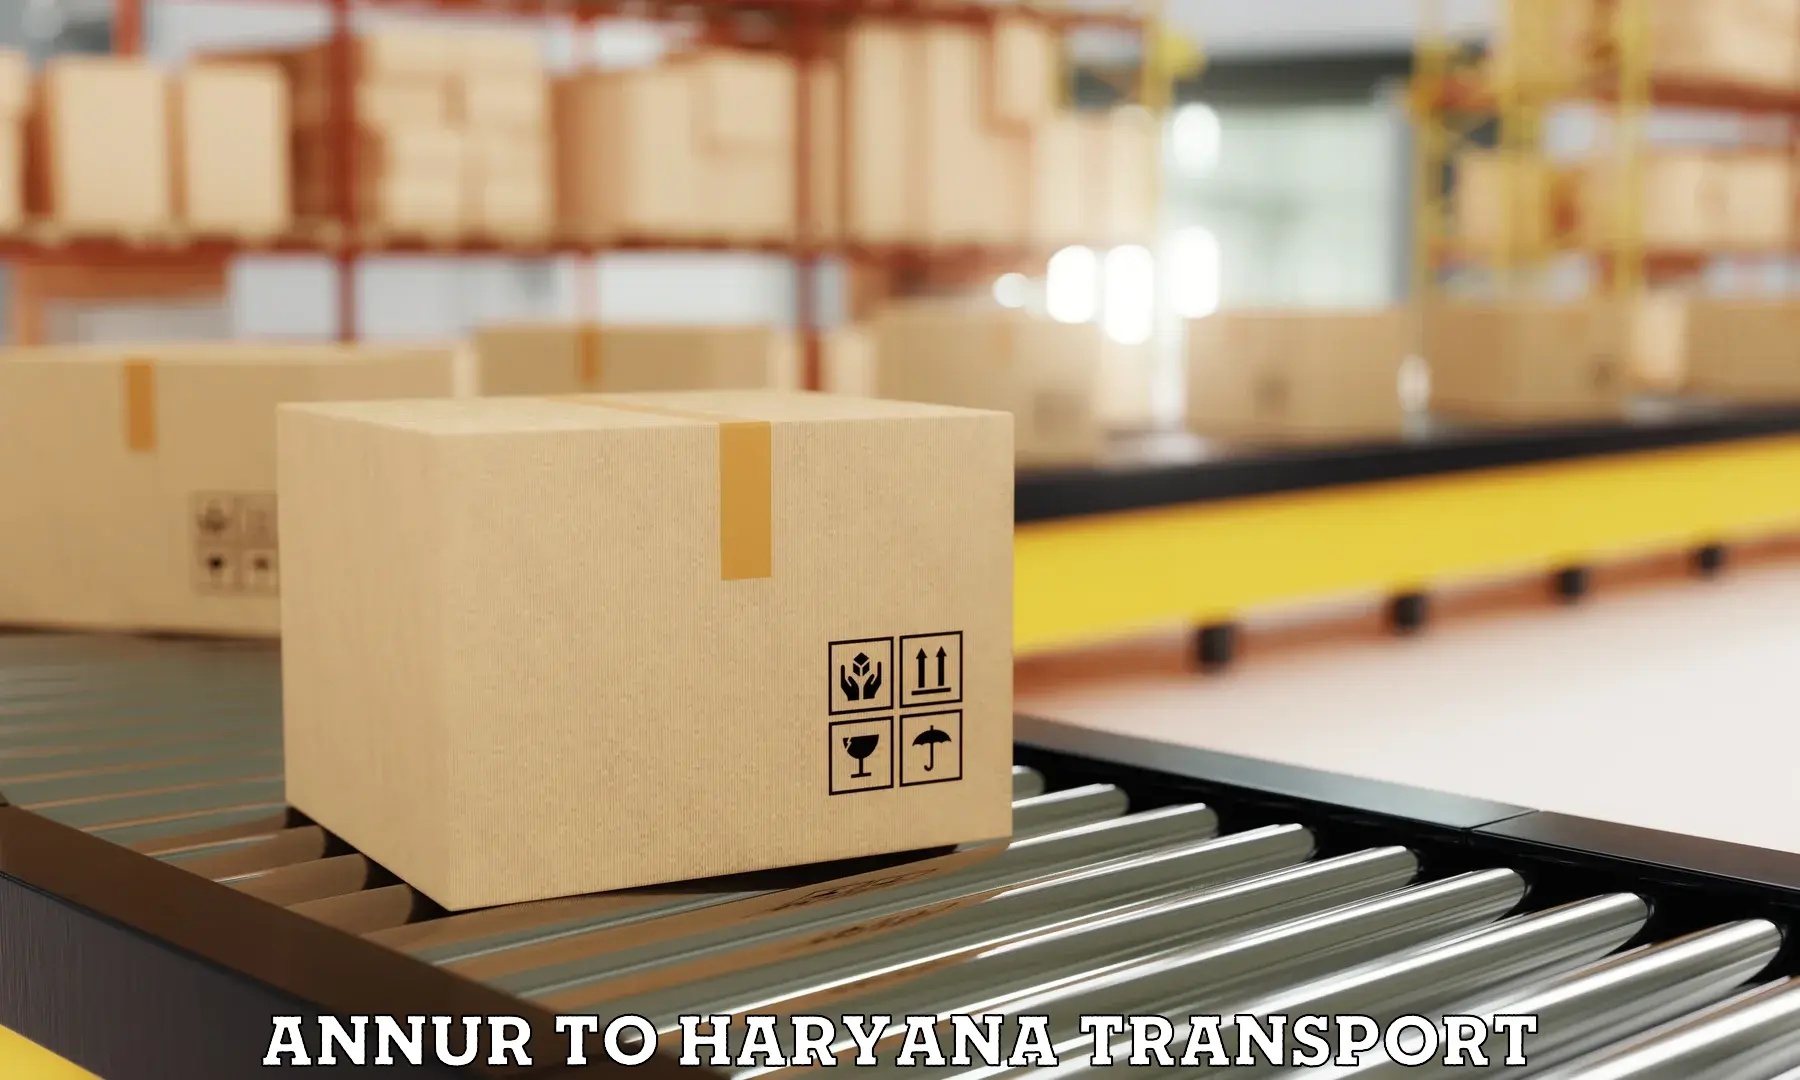 Daily transport service Annur to Haryana